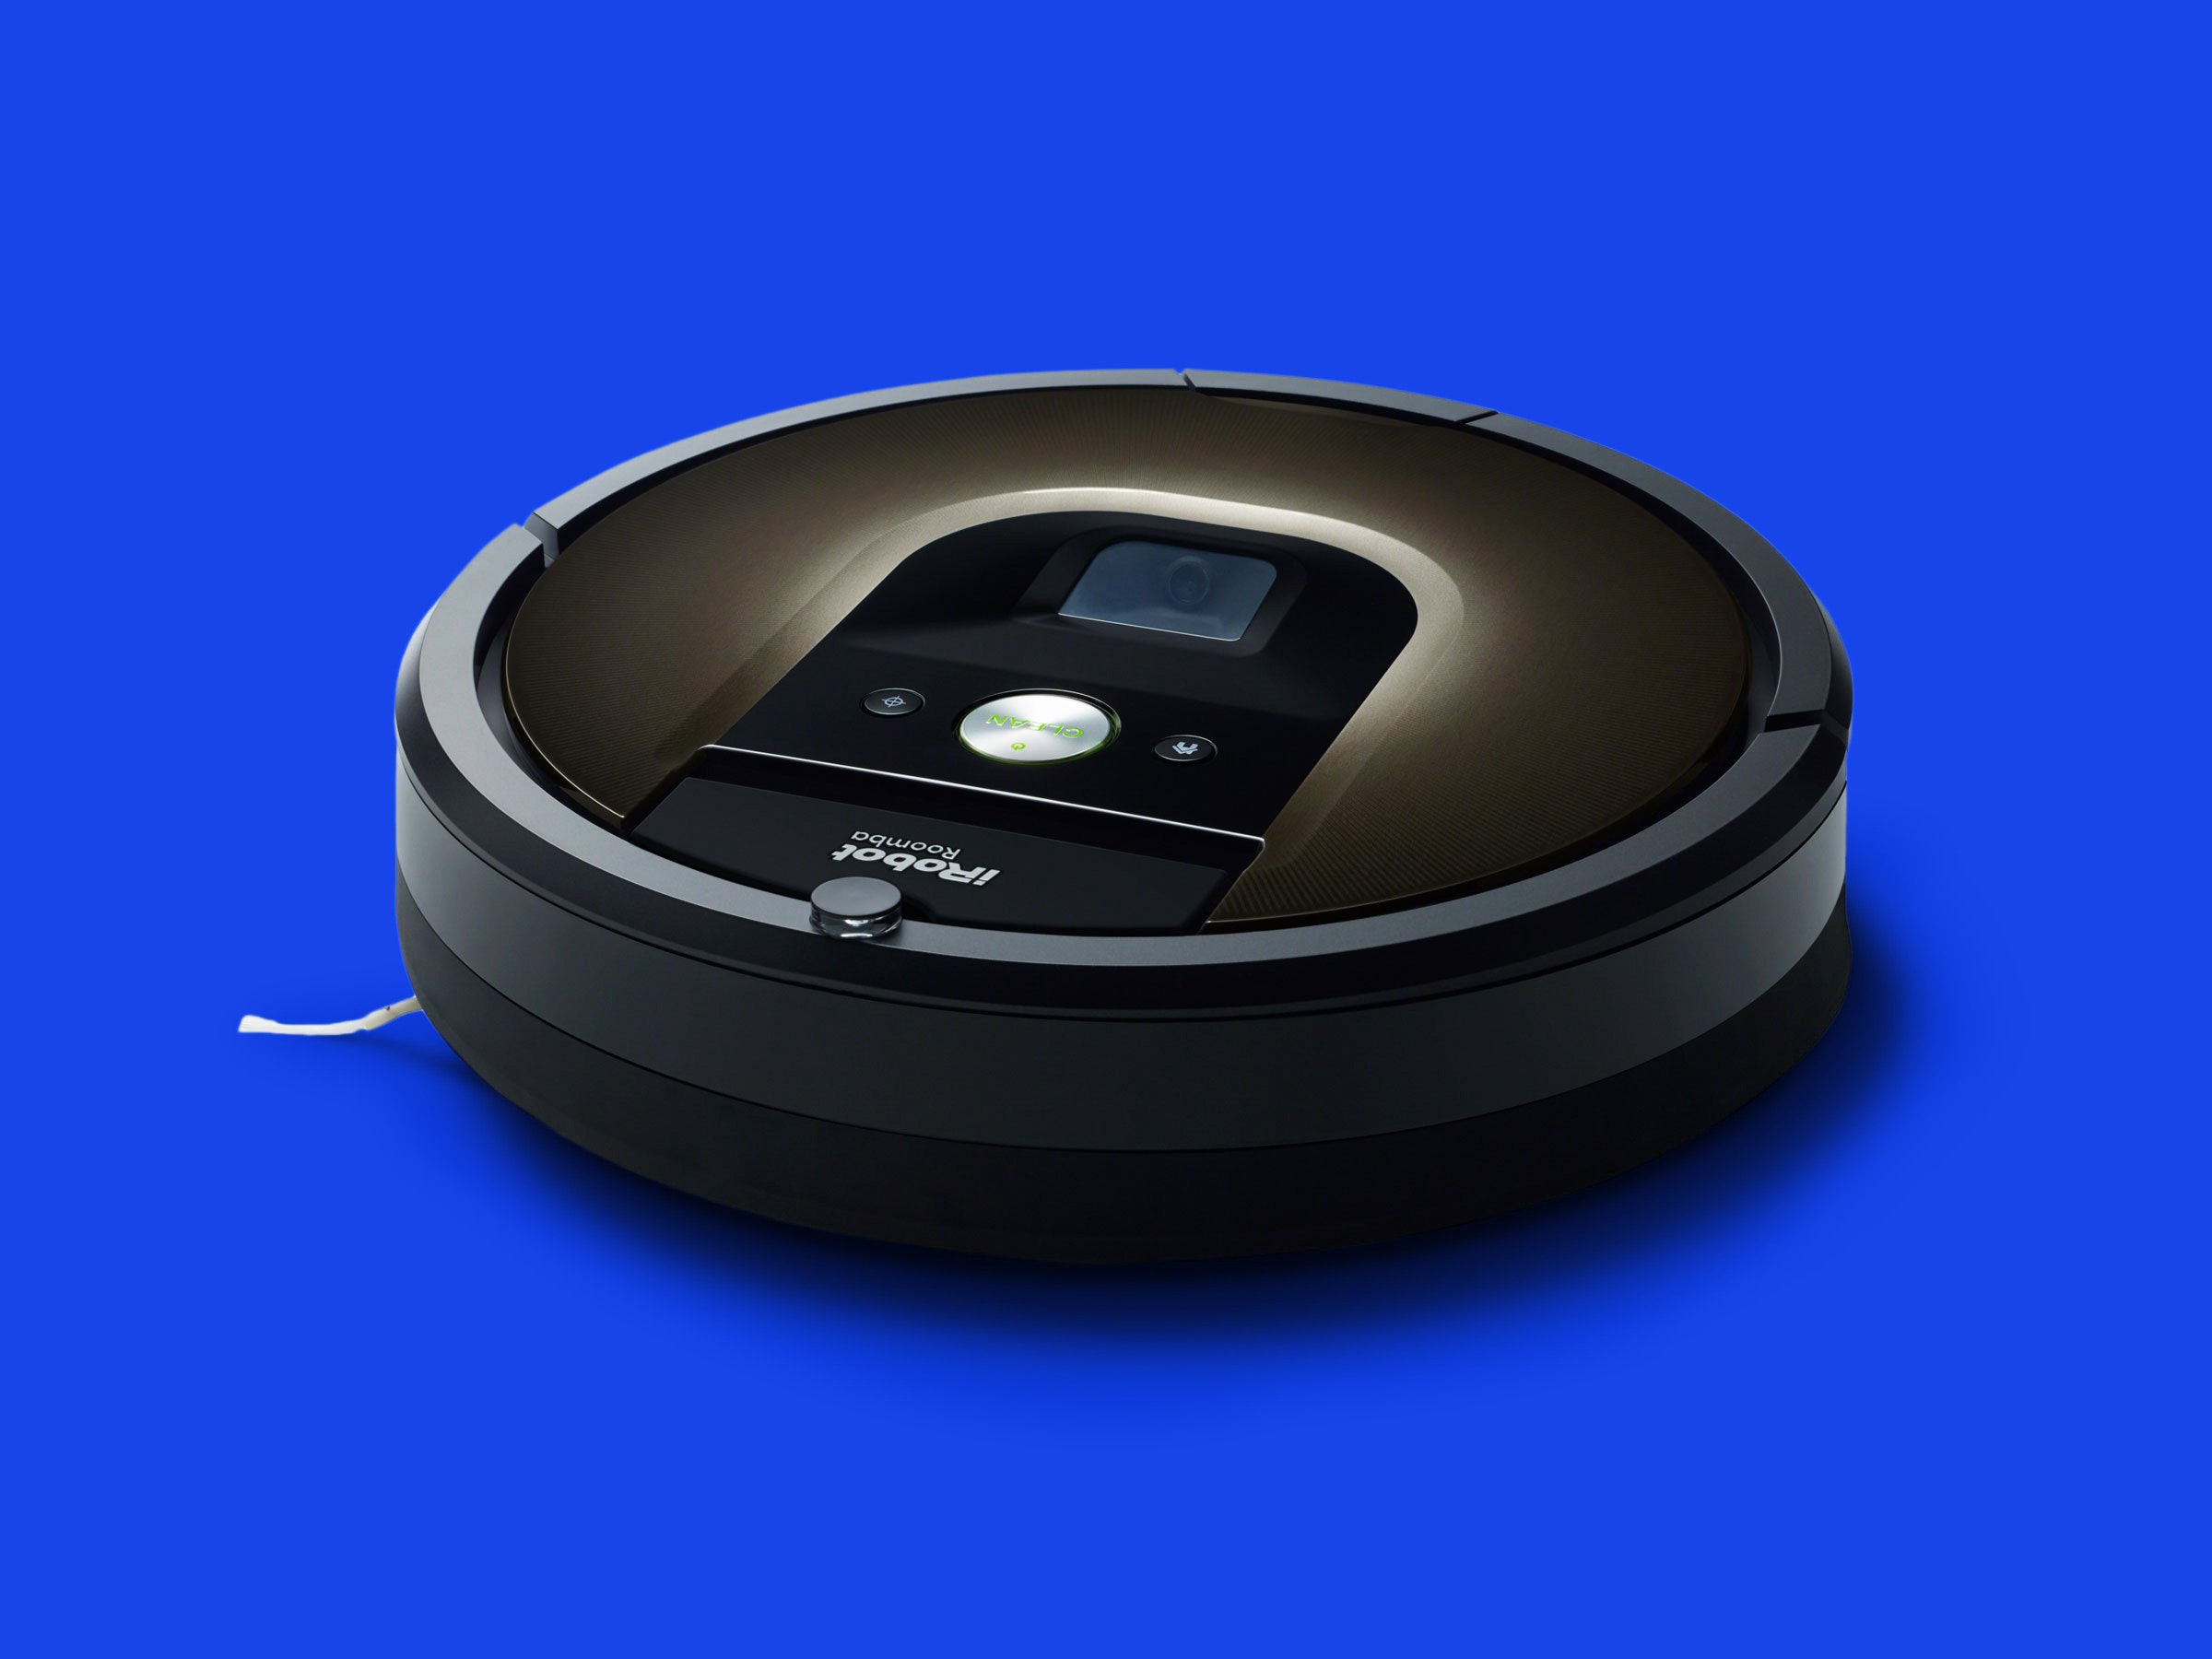 How robot vacuum can change the way you
look at cleaning